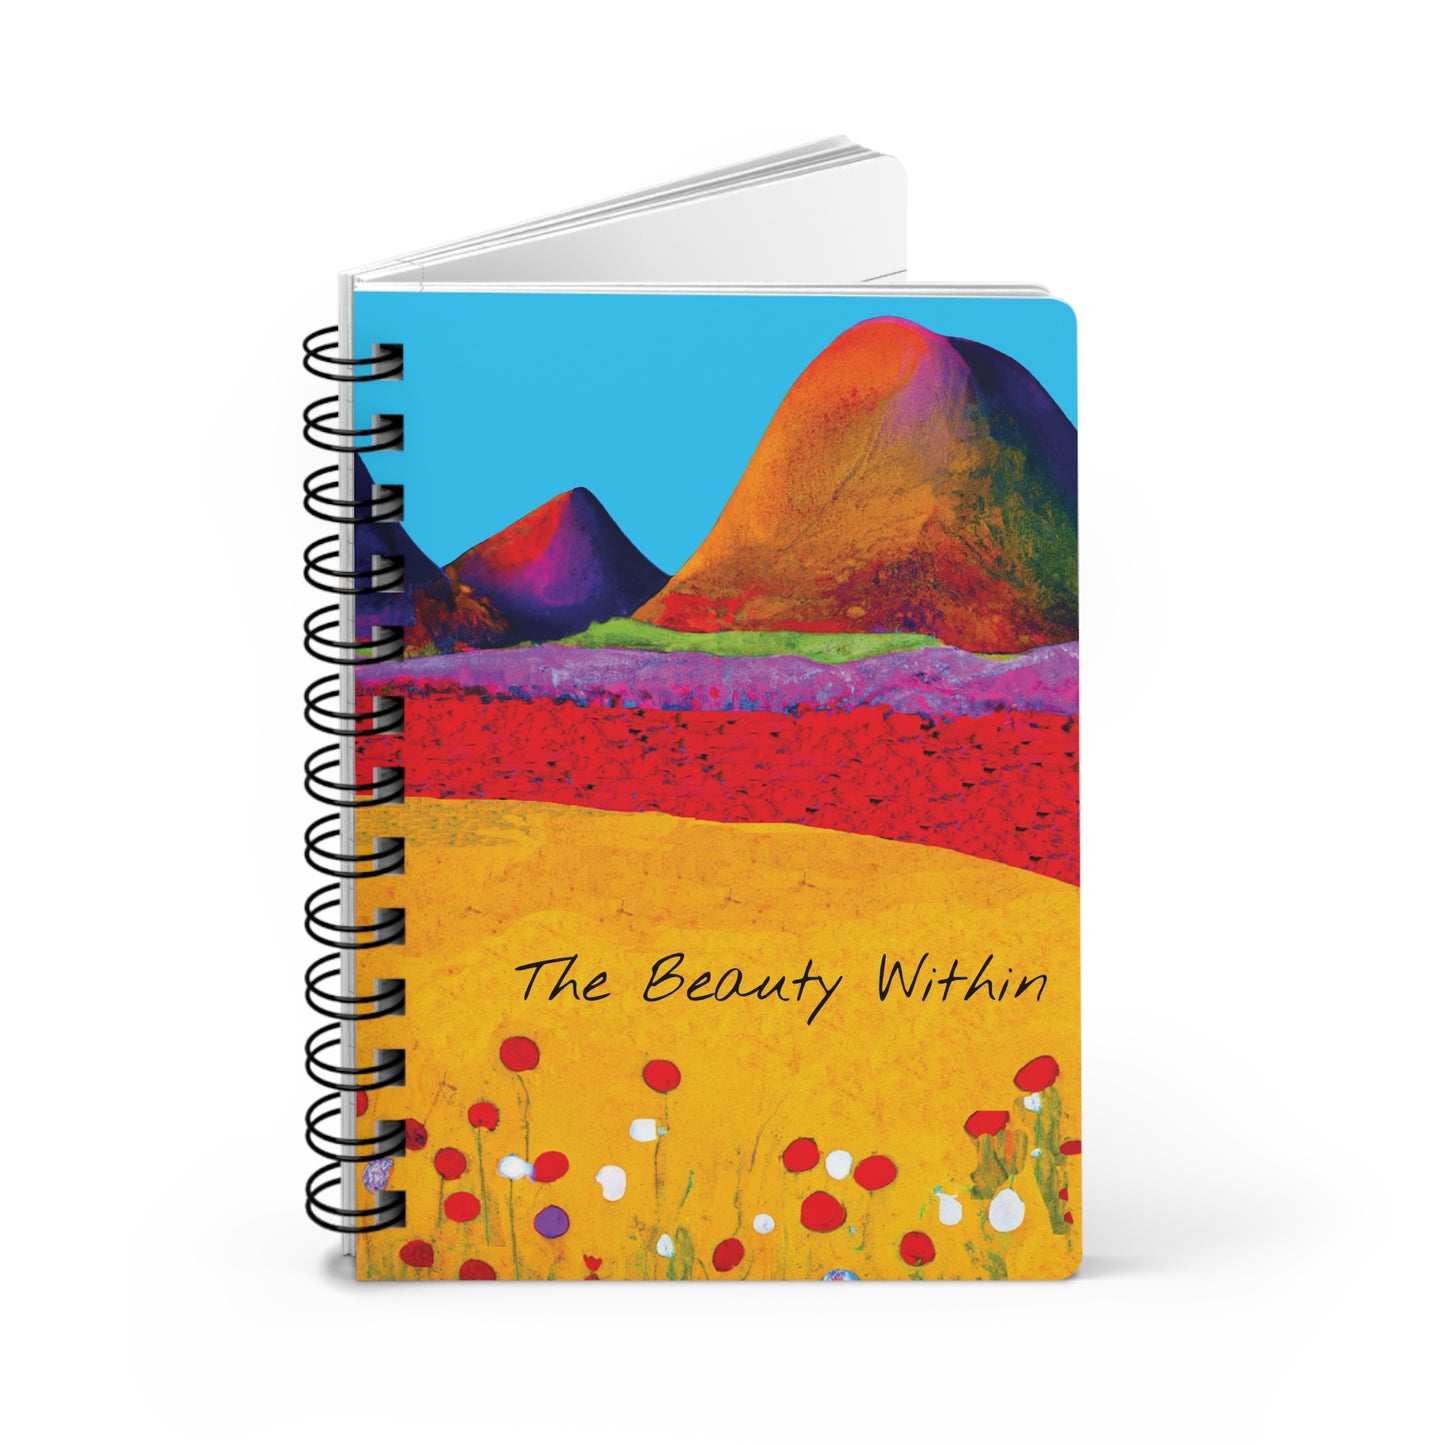 The Beauty Within Spiral Bound Notebooks and Journals with 2023-2024 Year-at-a-Glance Calendar